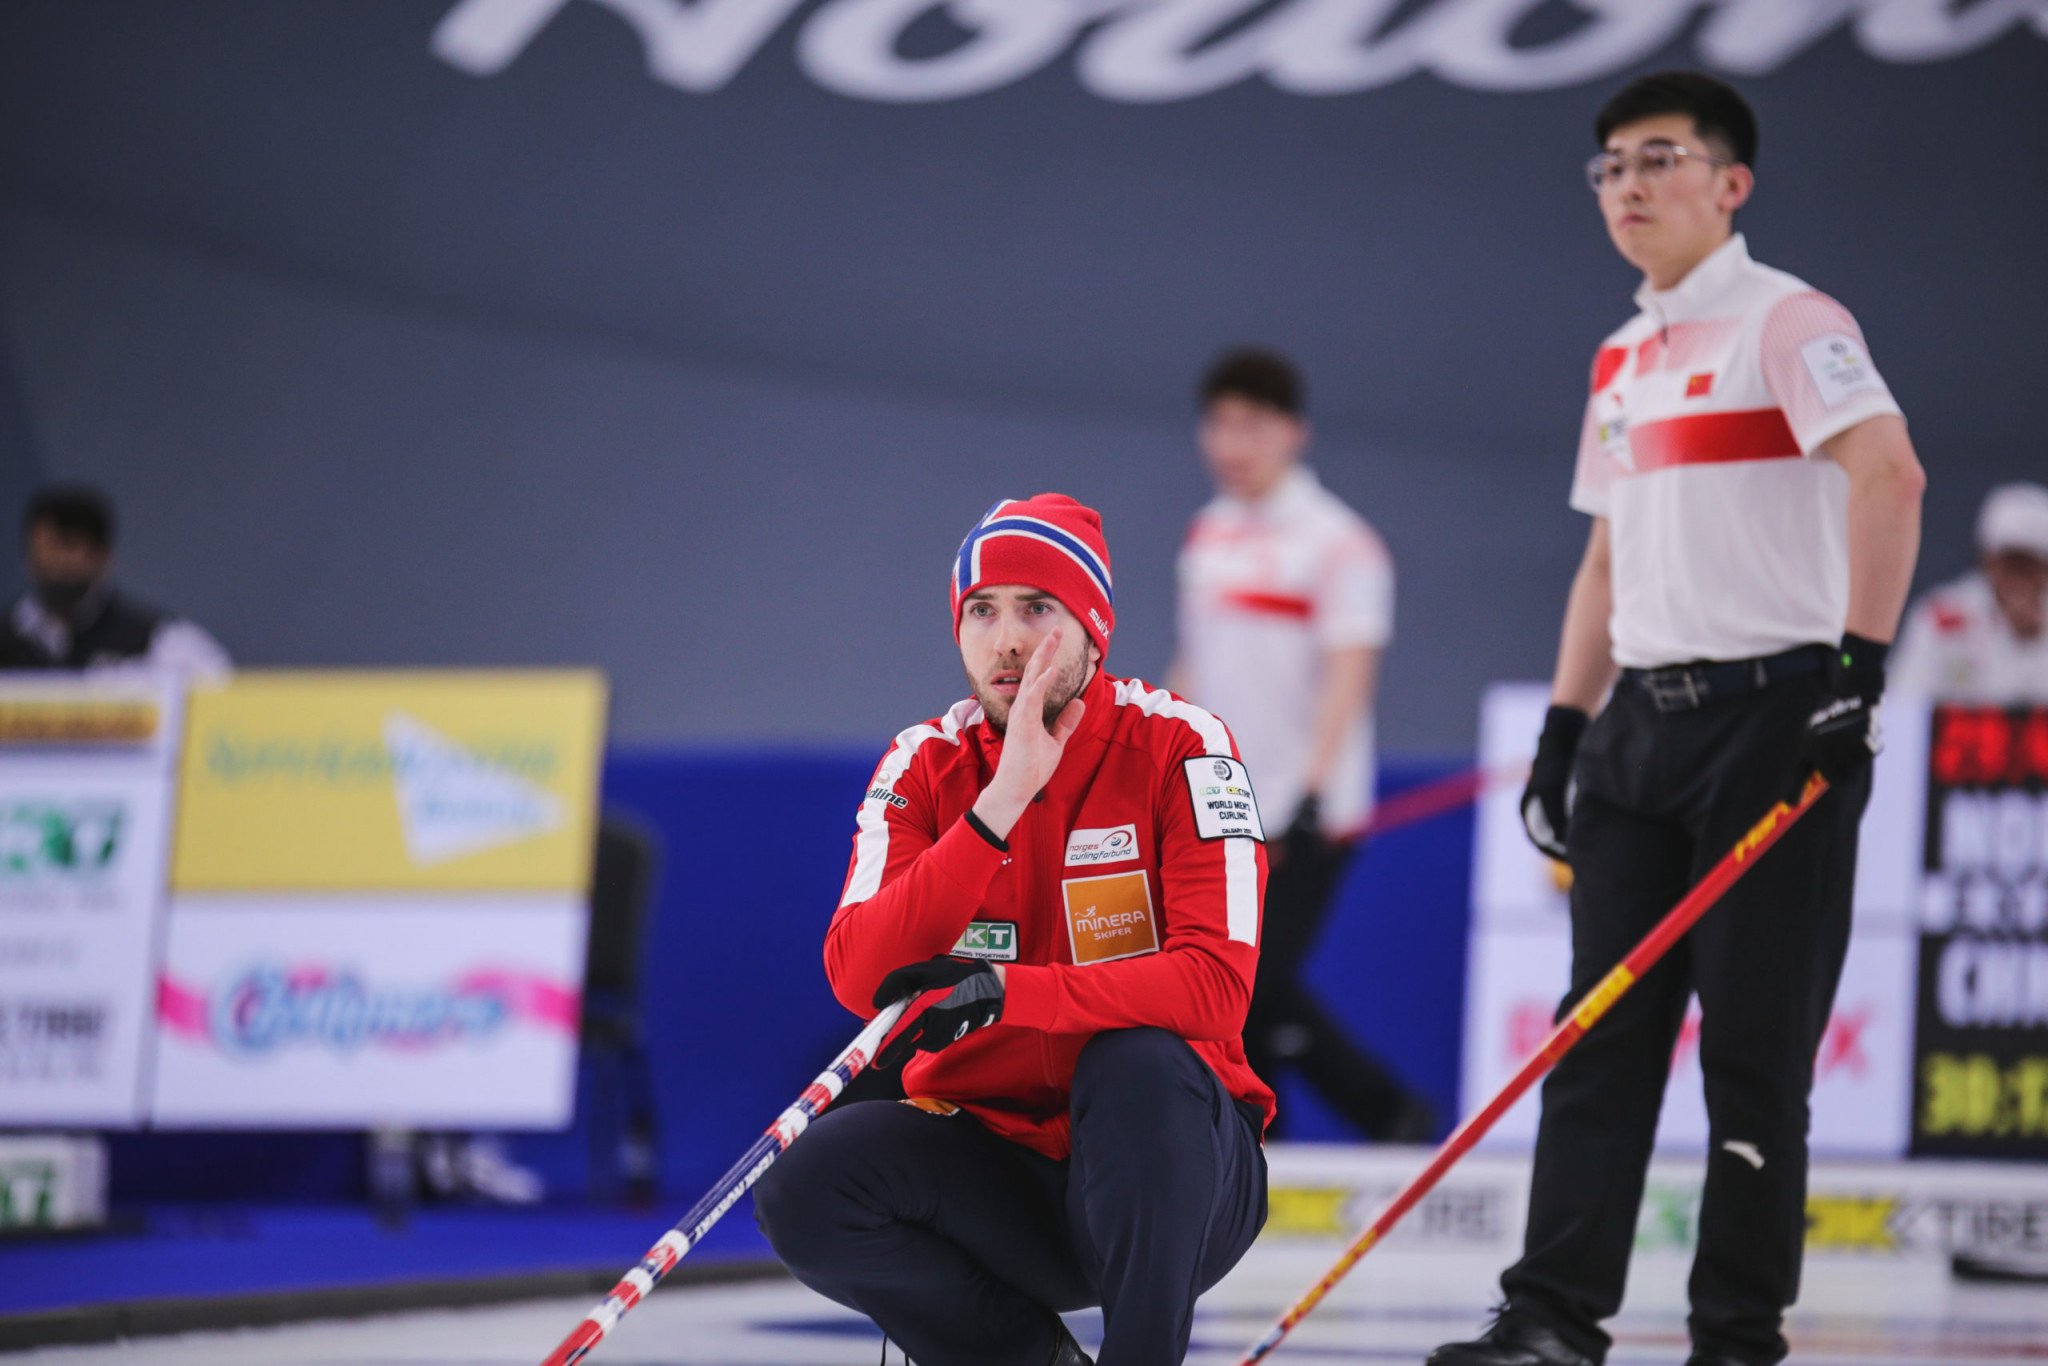 Unbeaten Norway go top on day two of World Men's Curling Championship